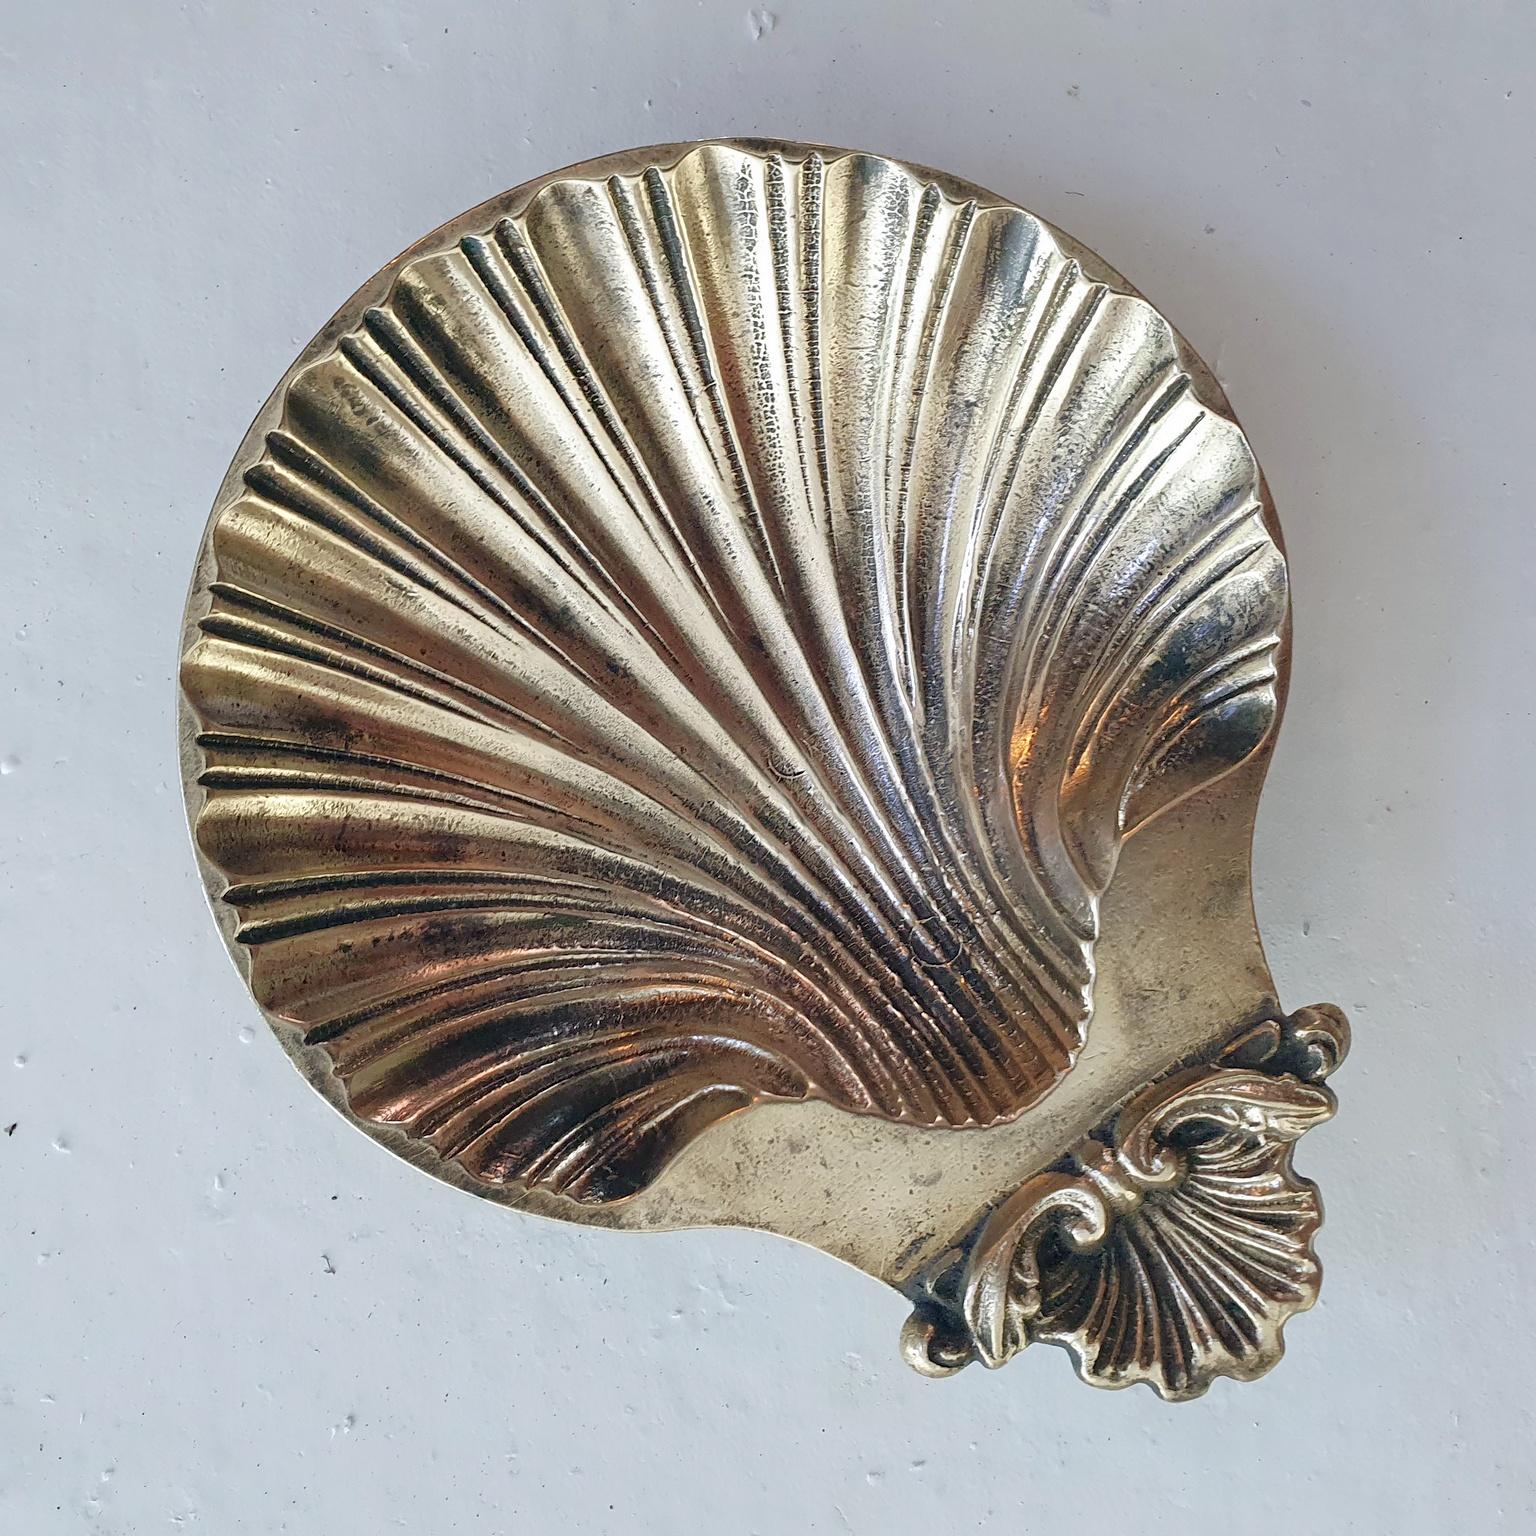 Cute footed clam dish in heavy cast bronze. Reproduction from an original design from the 18th century. This particular piece is made in Italy. This is perfect as a soap dish, ashtray, vide-poche or for snacks.